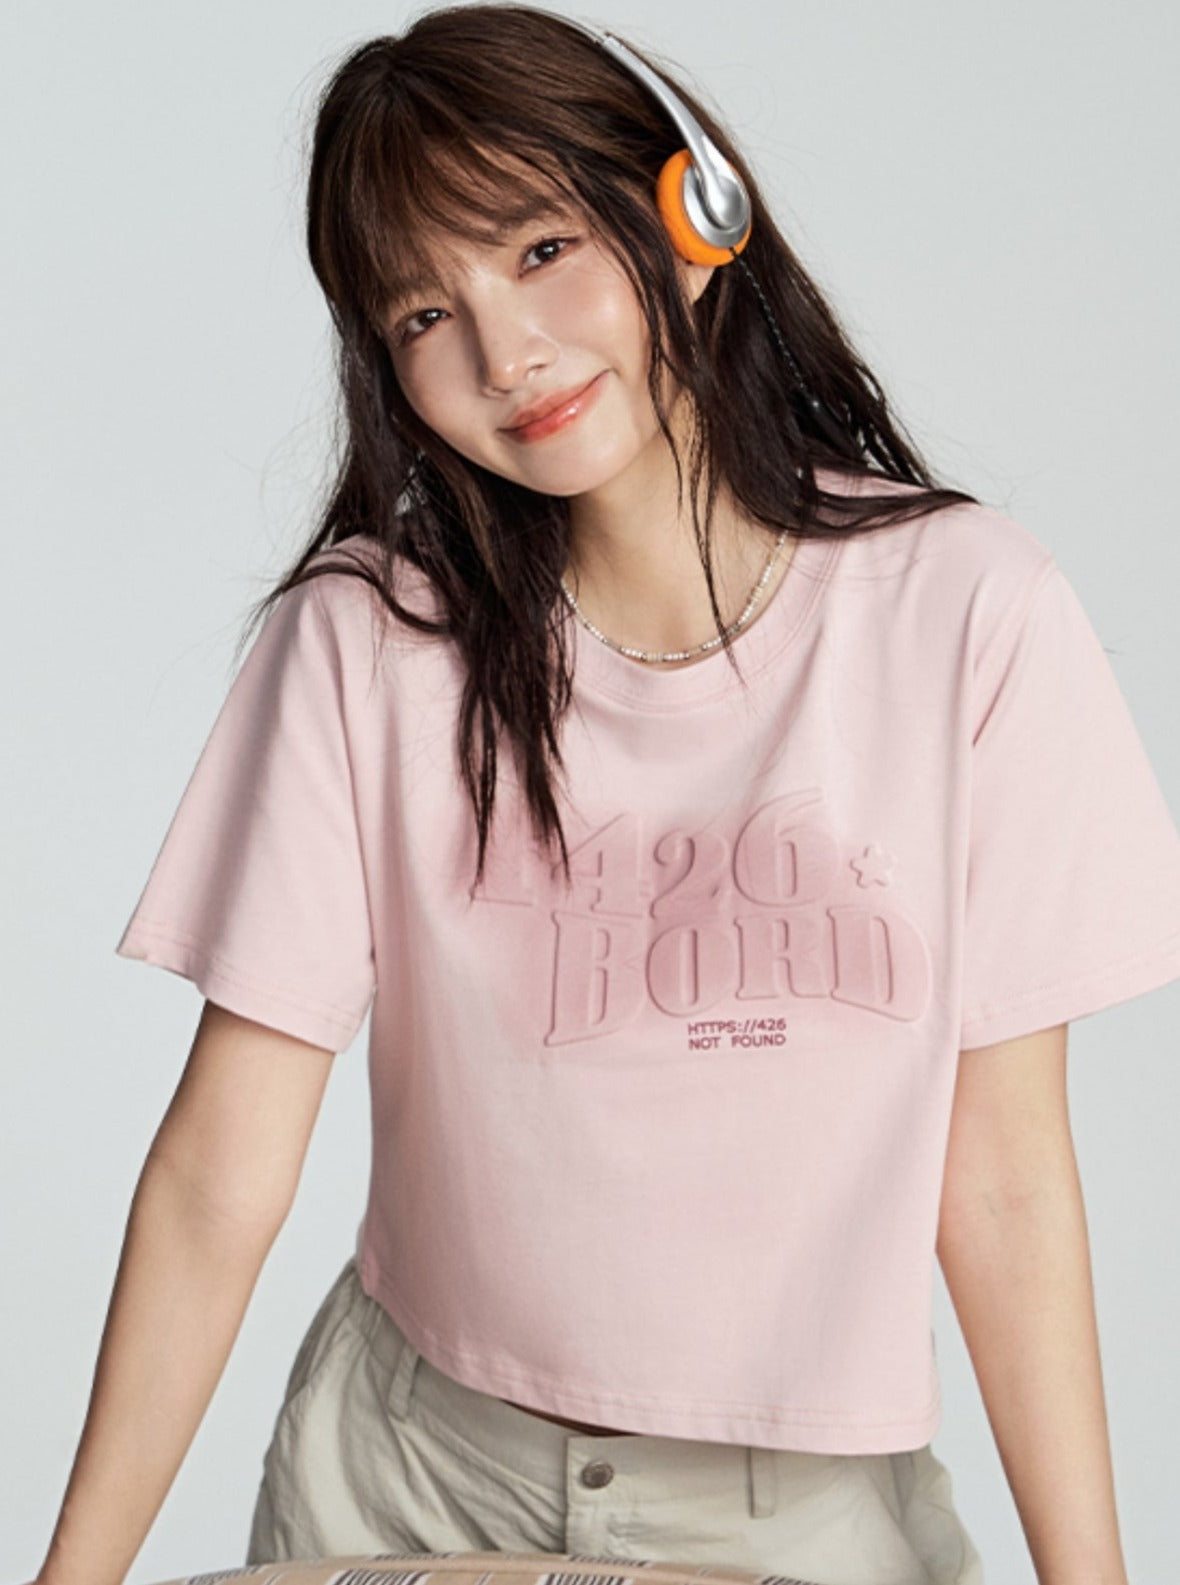 Tee with Embossed Letter Design - chiclara